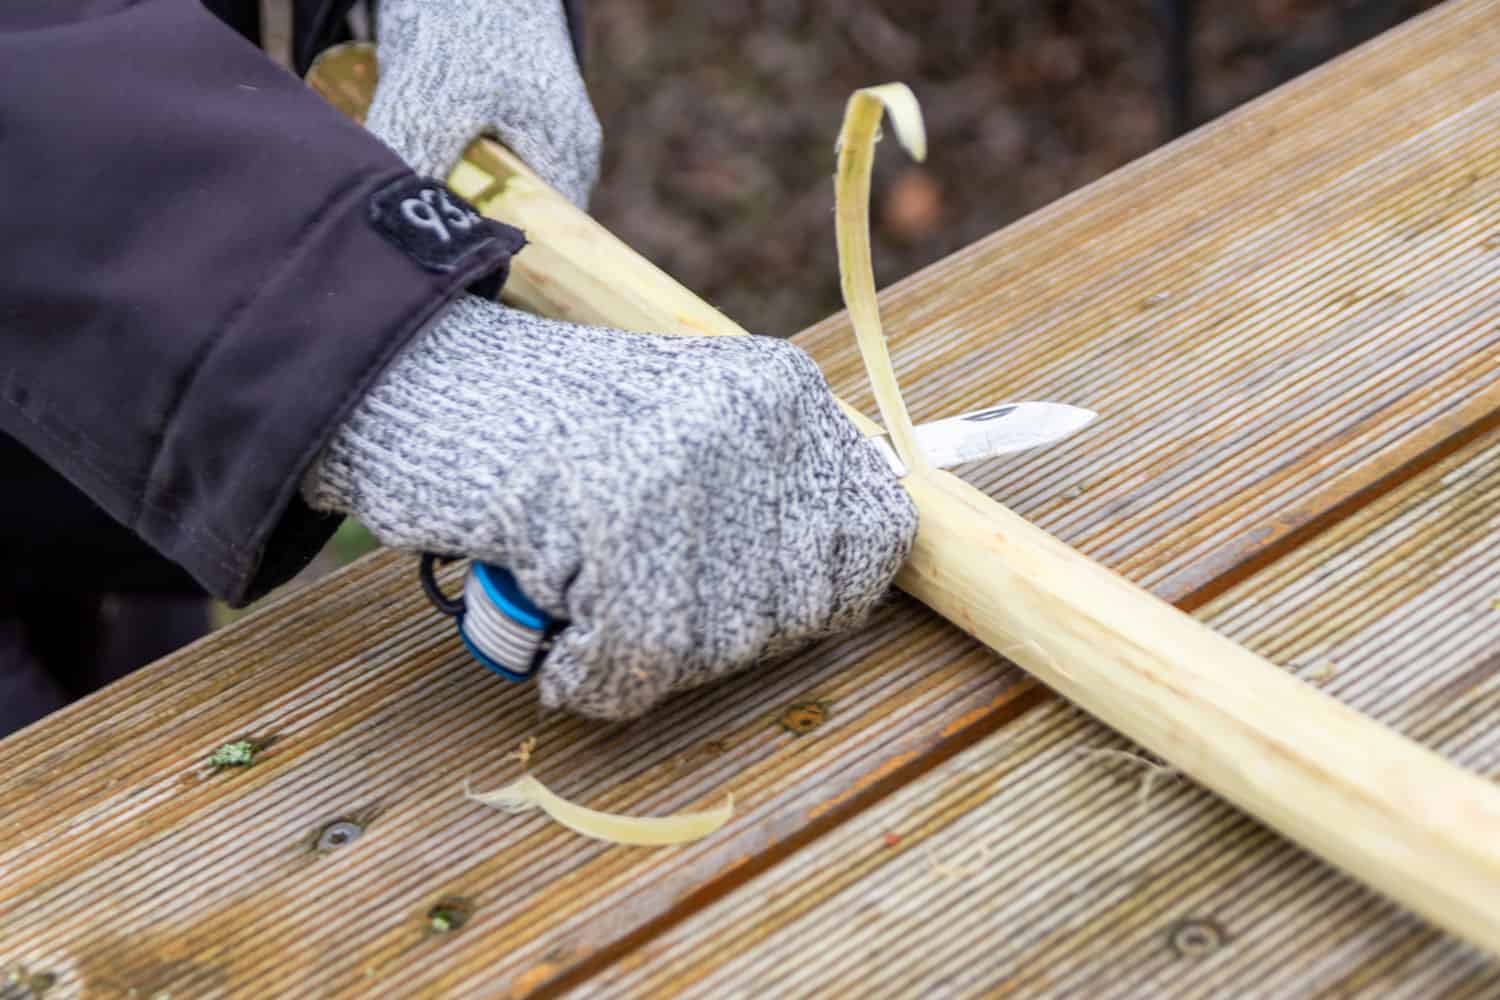 A worker wearing protective gloves while working on his wood working project